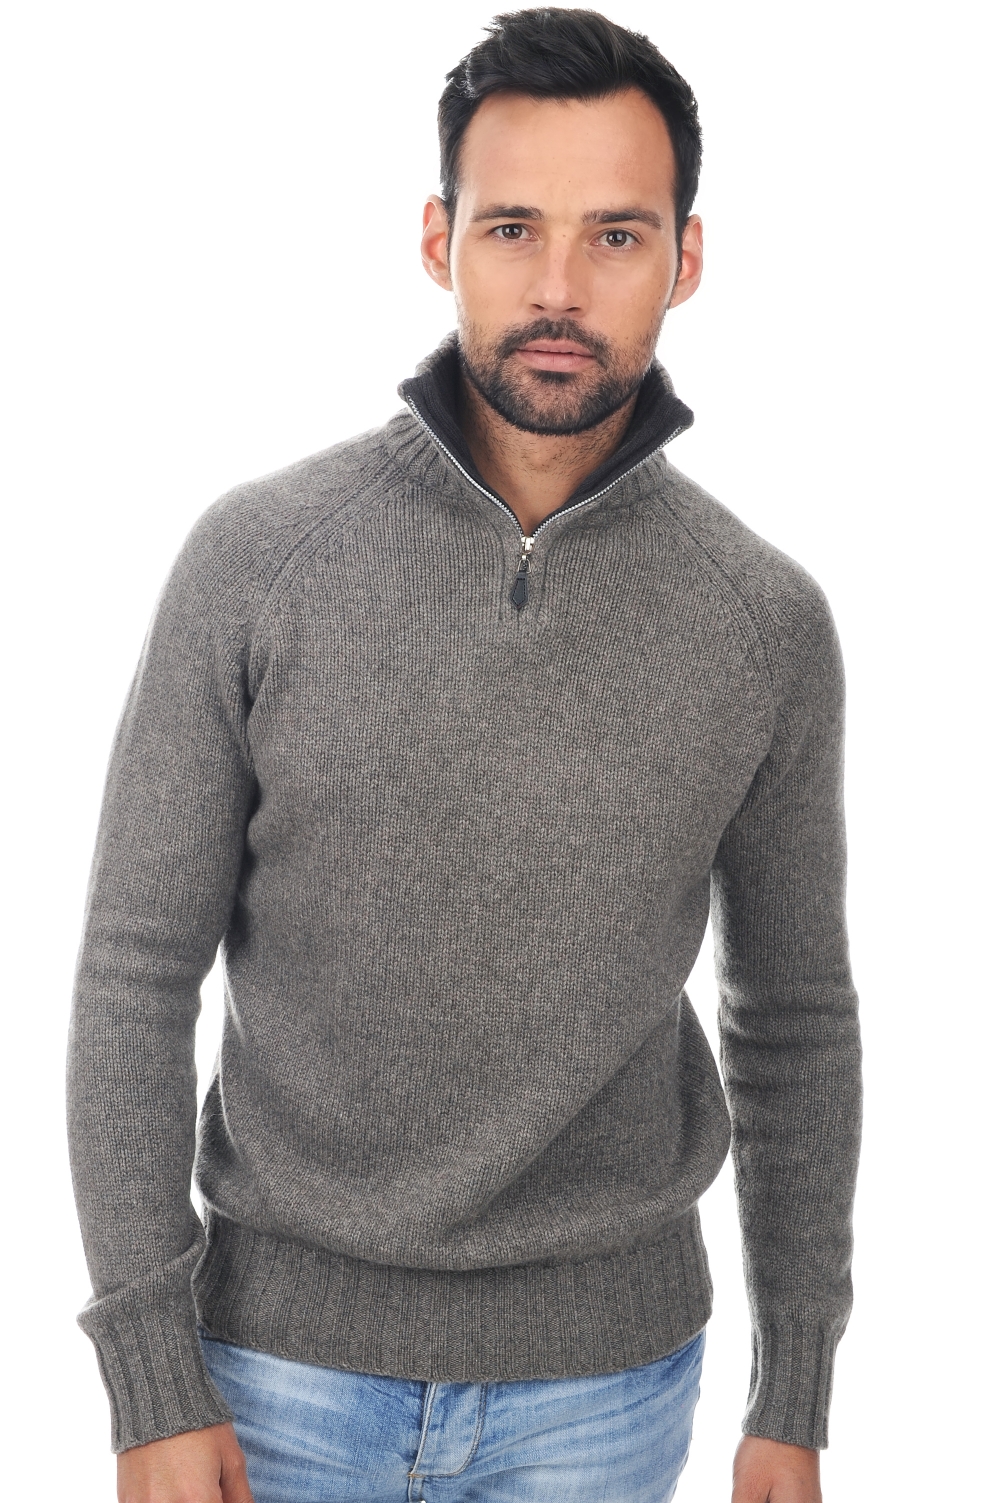 Cashmere men polo style sweaters olivier dove chine matt charcoal m